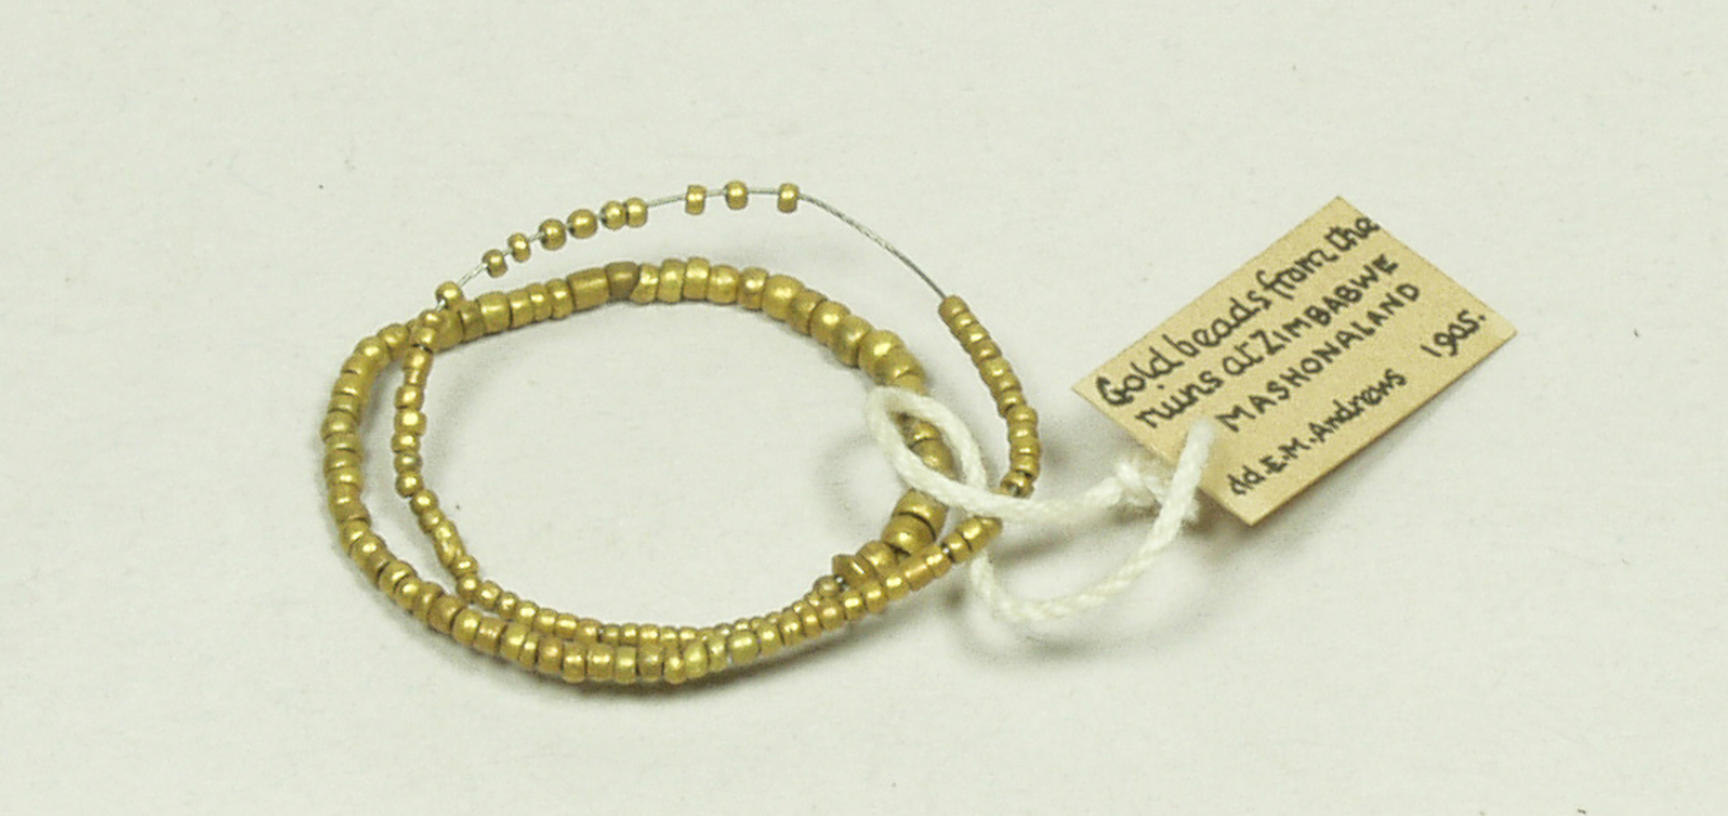 Gold beads from Great Zimbabwe